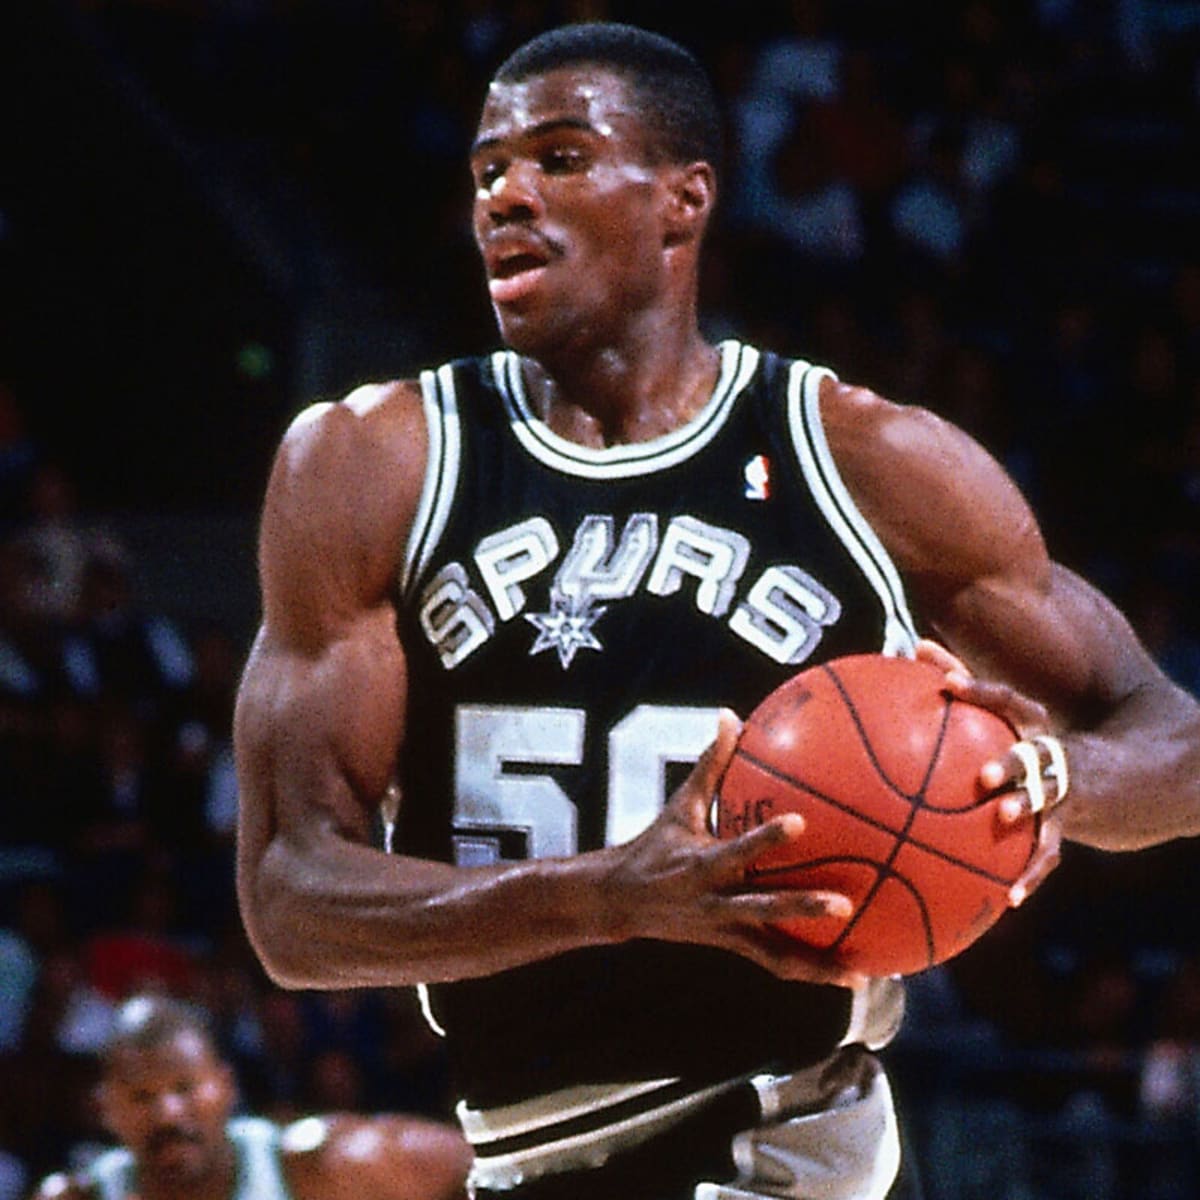 David Robinson of the San Antonio Spurs drives against the